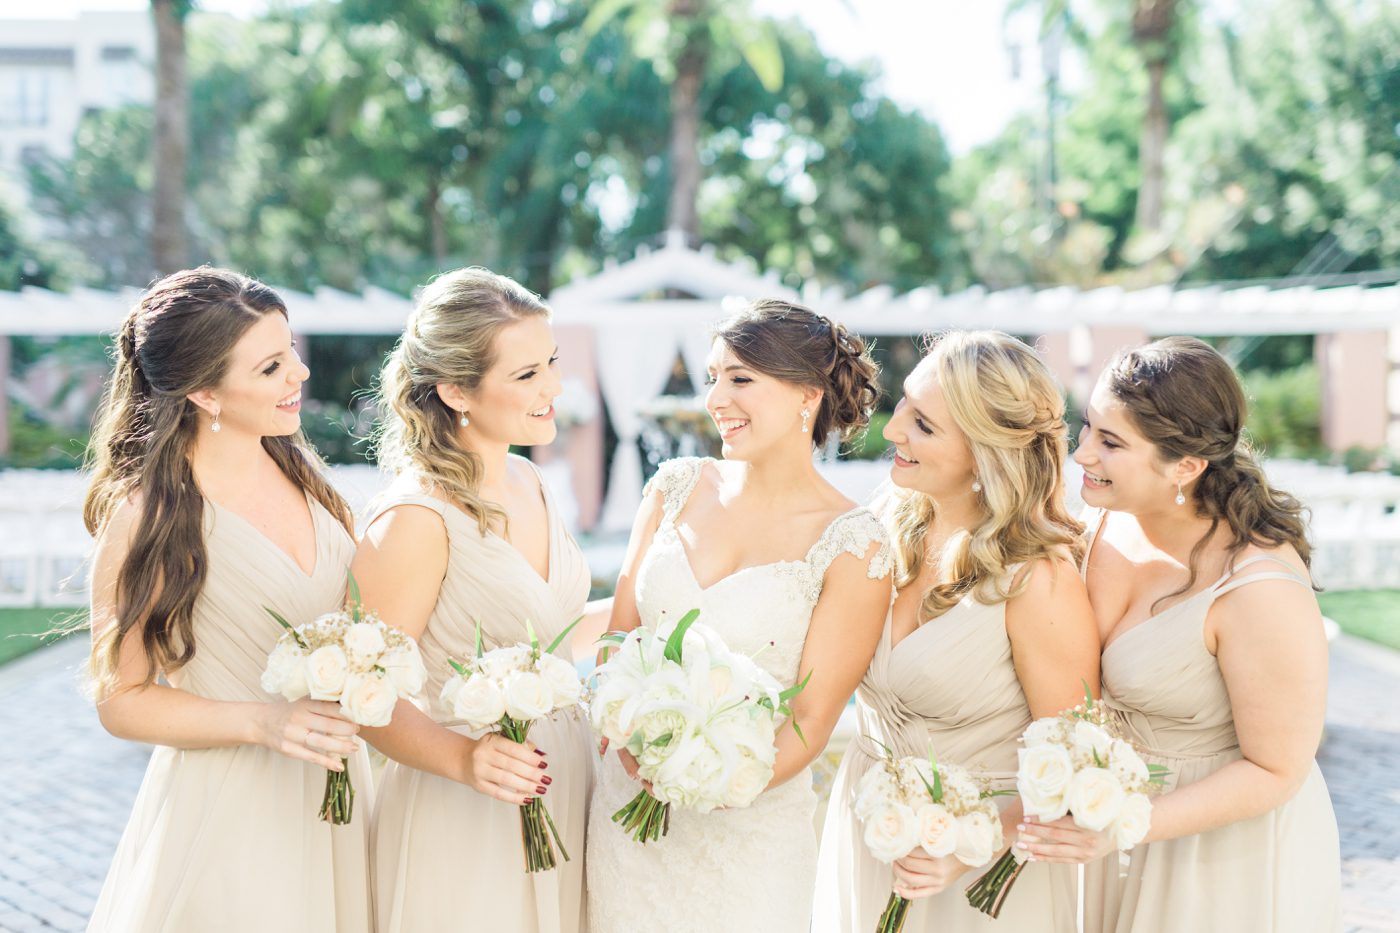 Bridesmaids pictures at Vinoy hotel wedding by Catherine Ann Photography